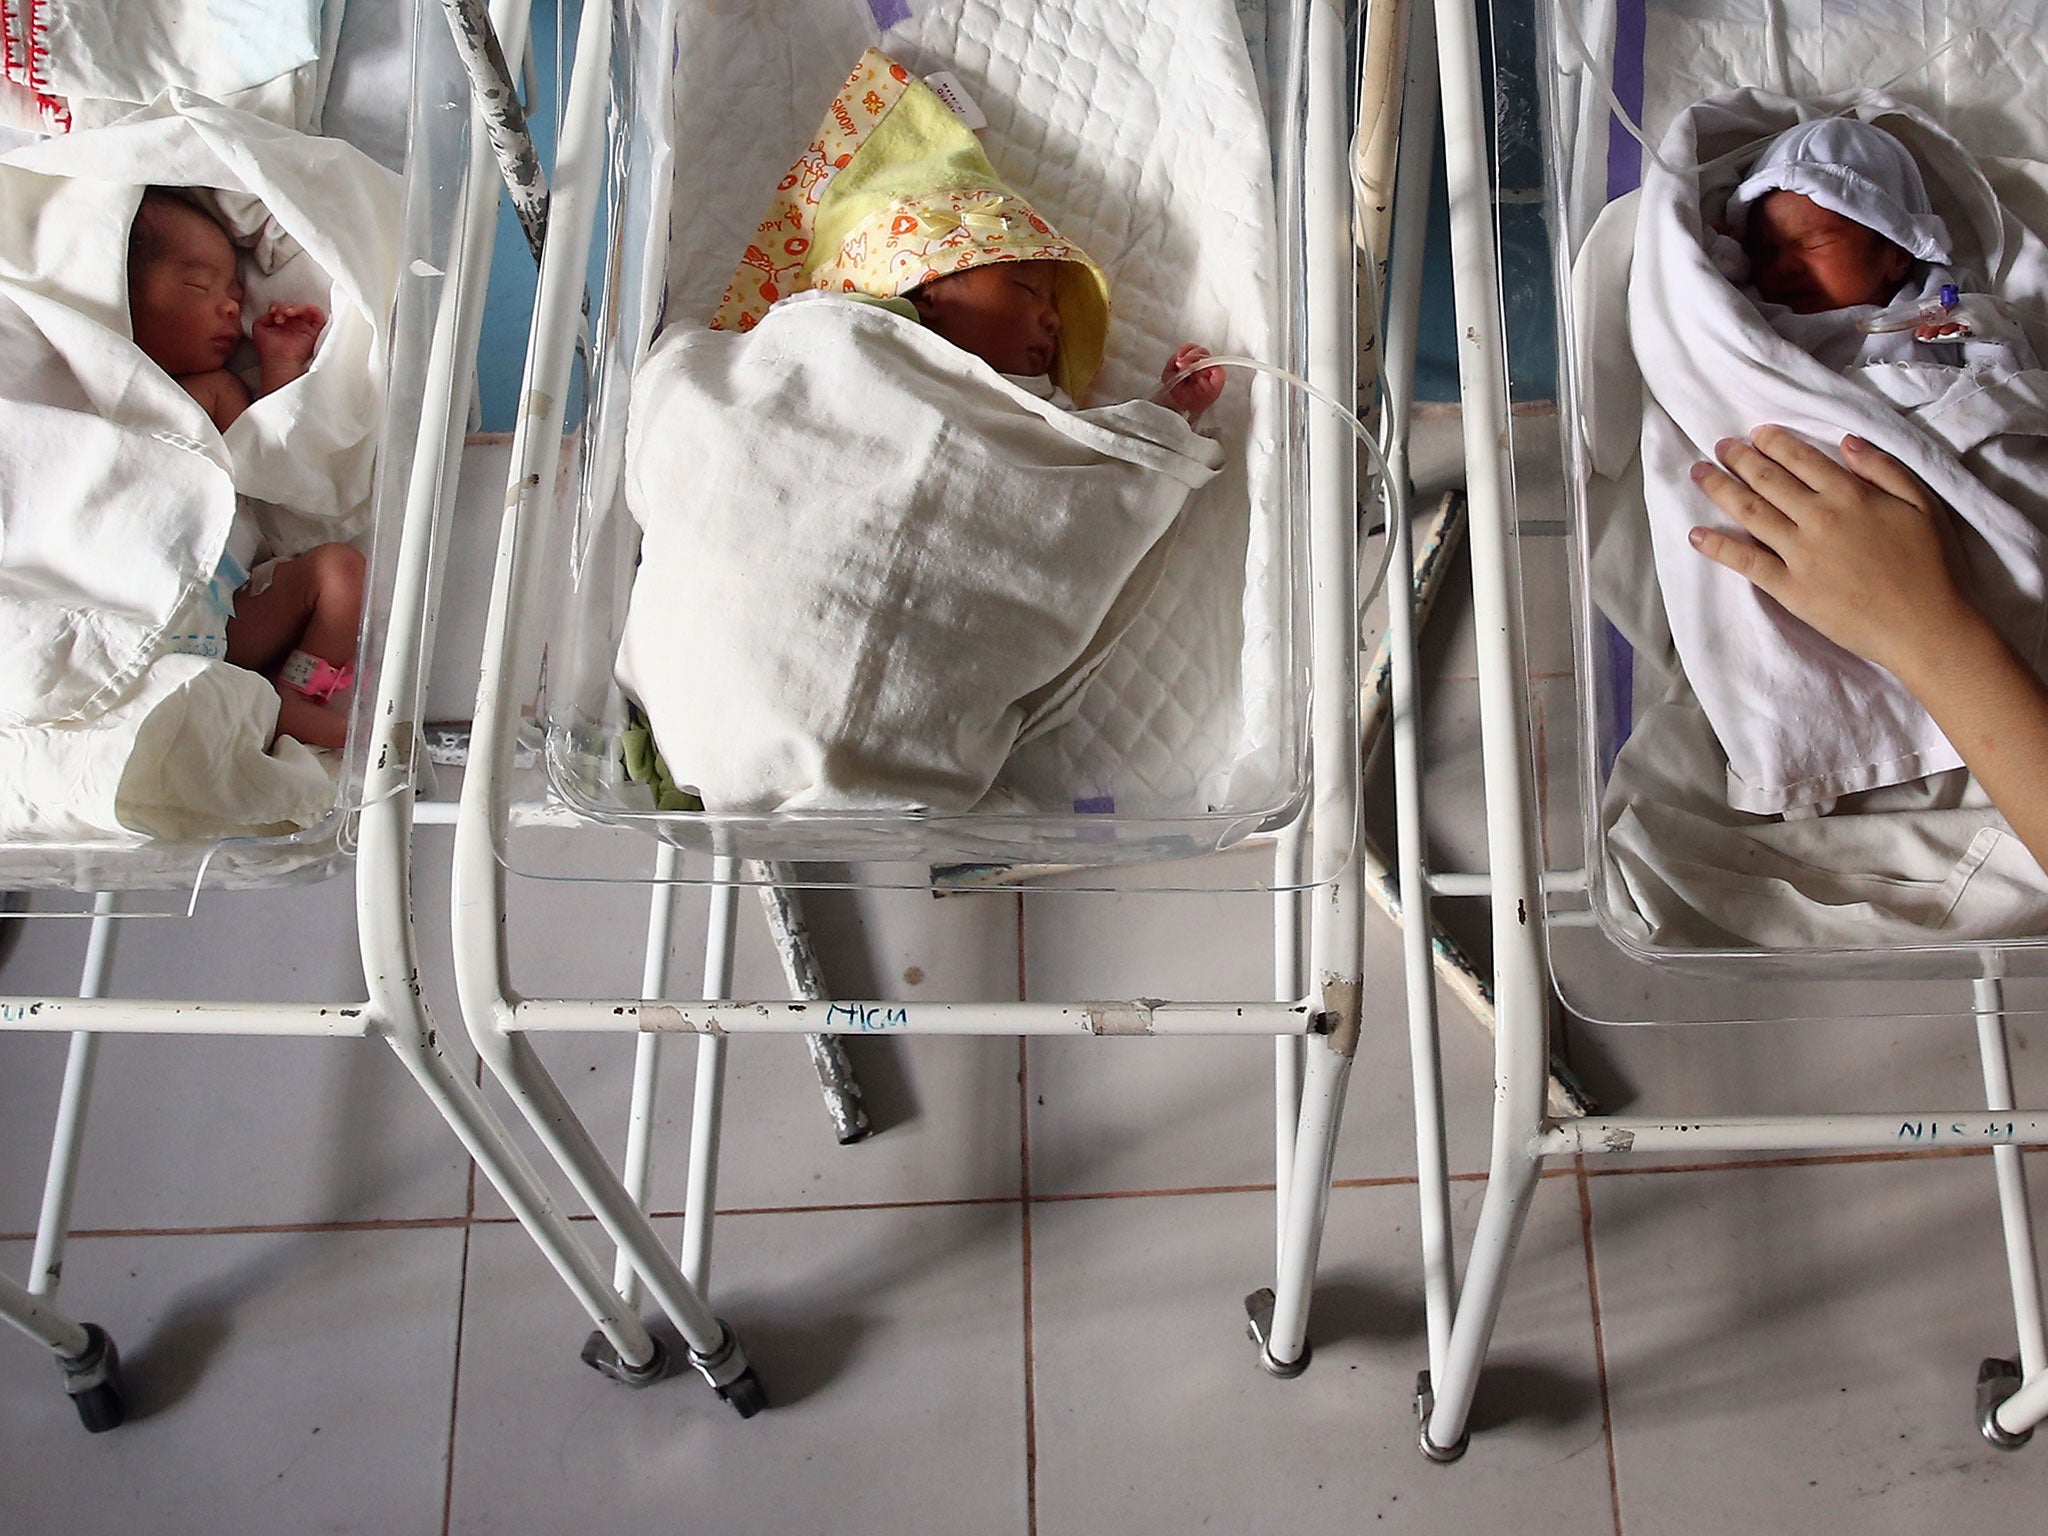 Britain faces a baby bust as the pandemic puts parents off having children